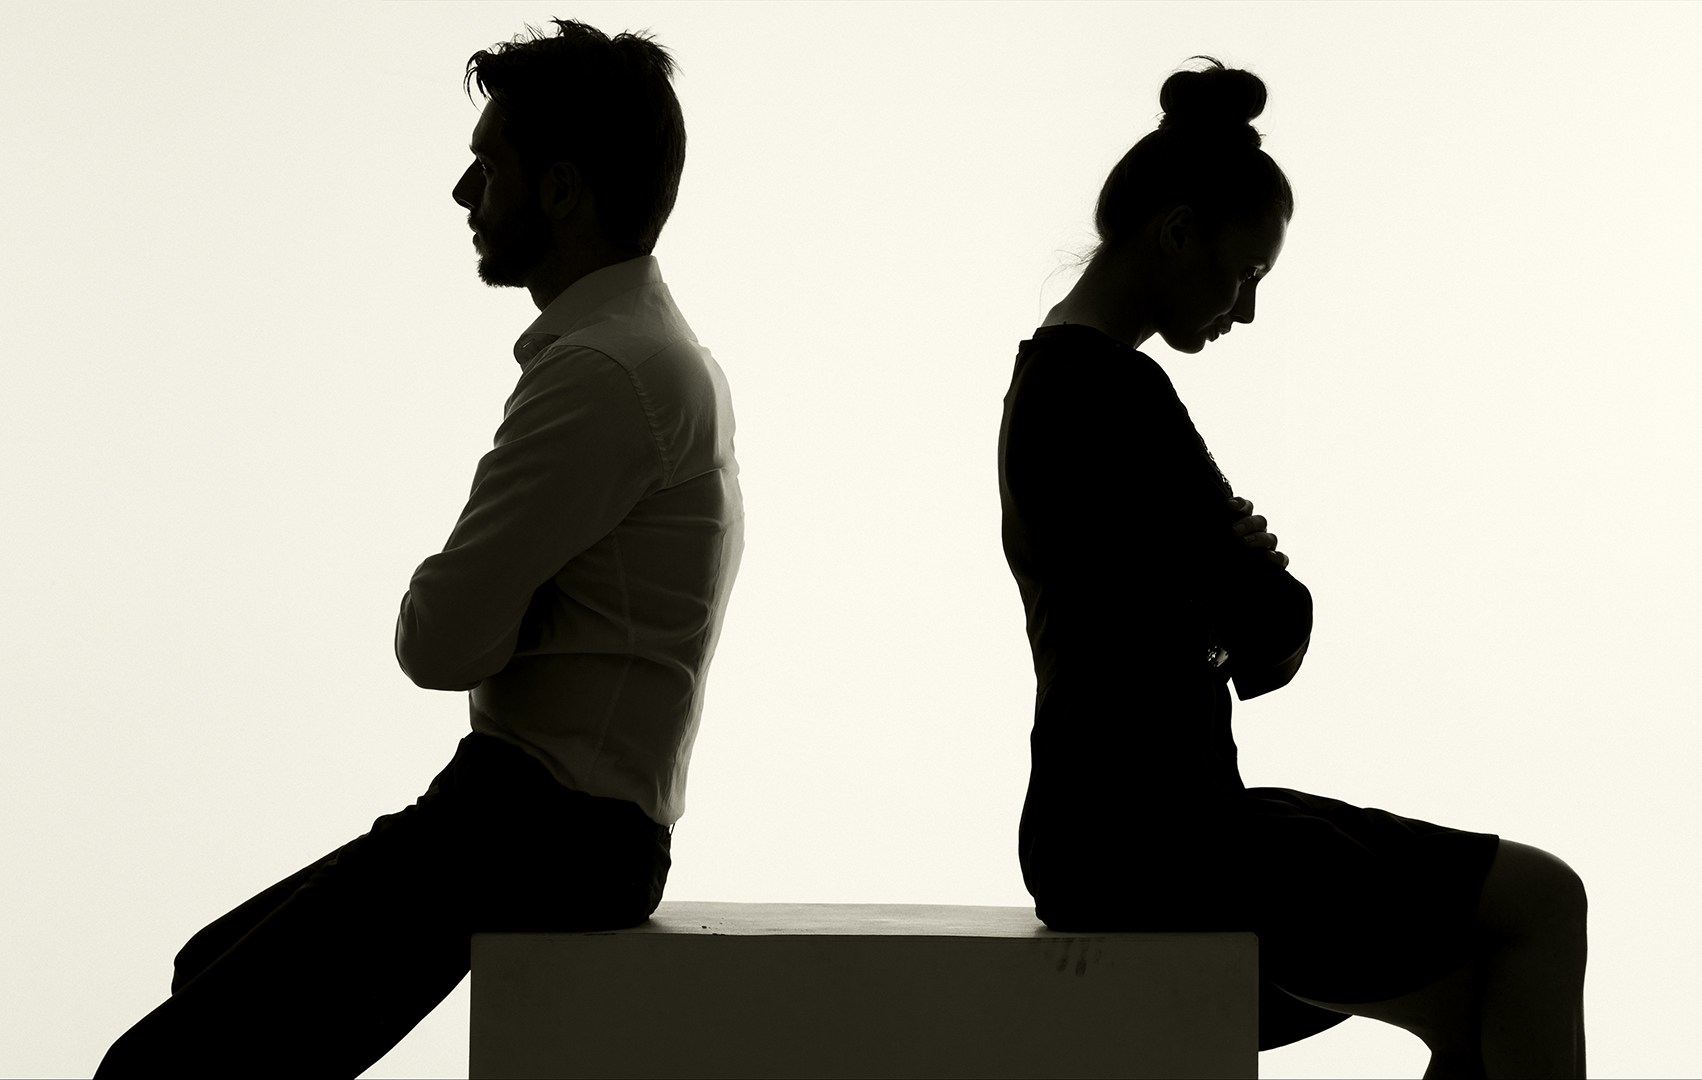 silhouette of a couple sitting with their backs to each other and arms crossed looking downcast